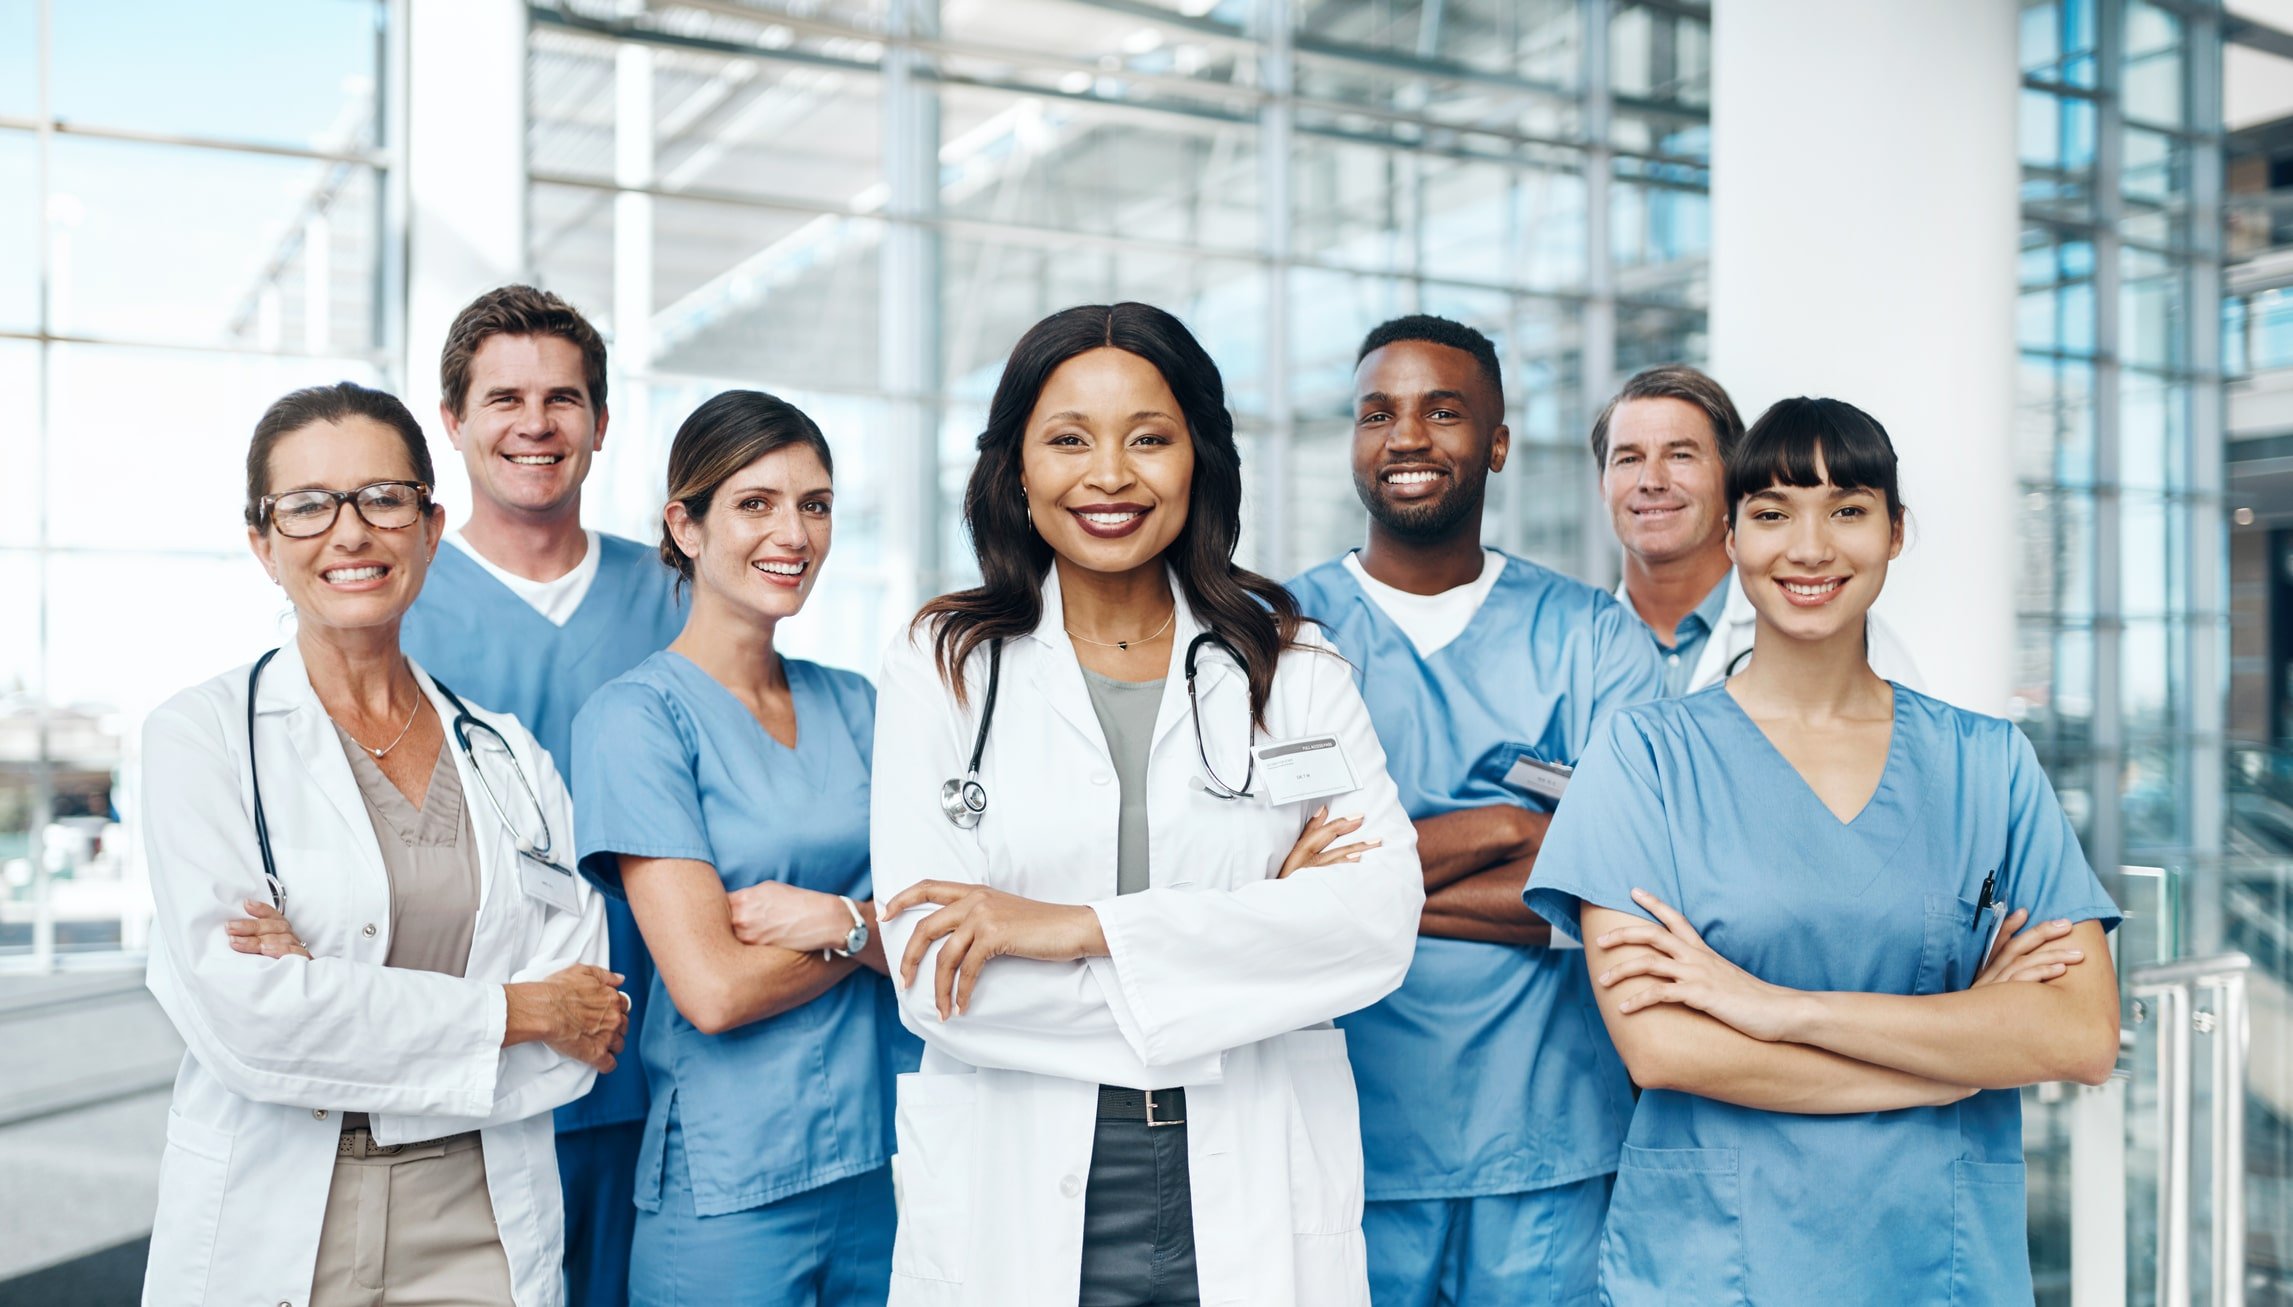 cultural diversity in healthcare